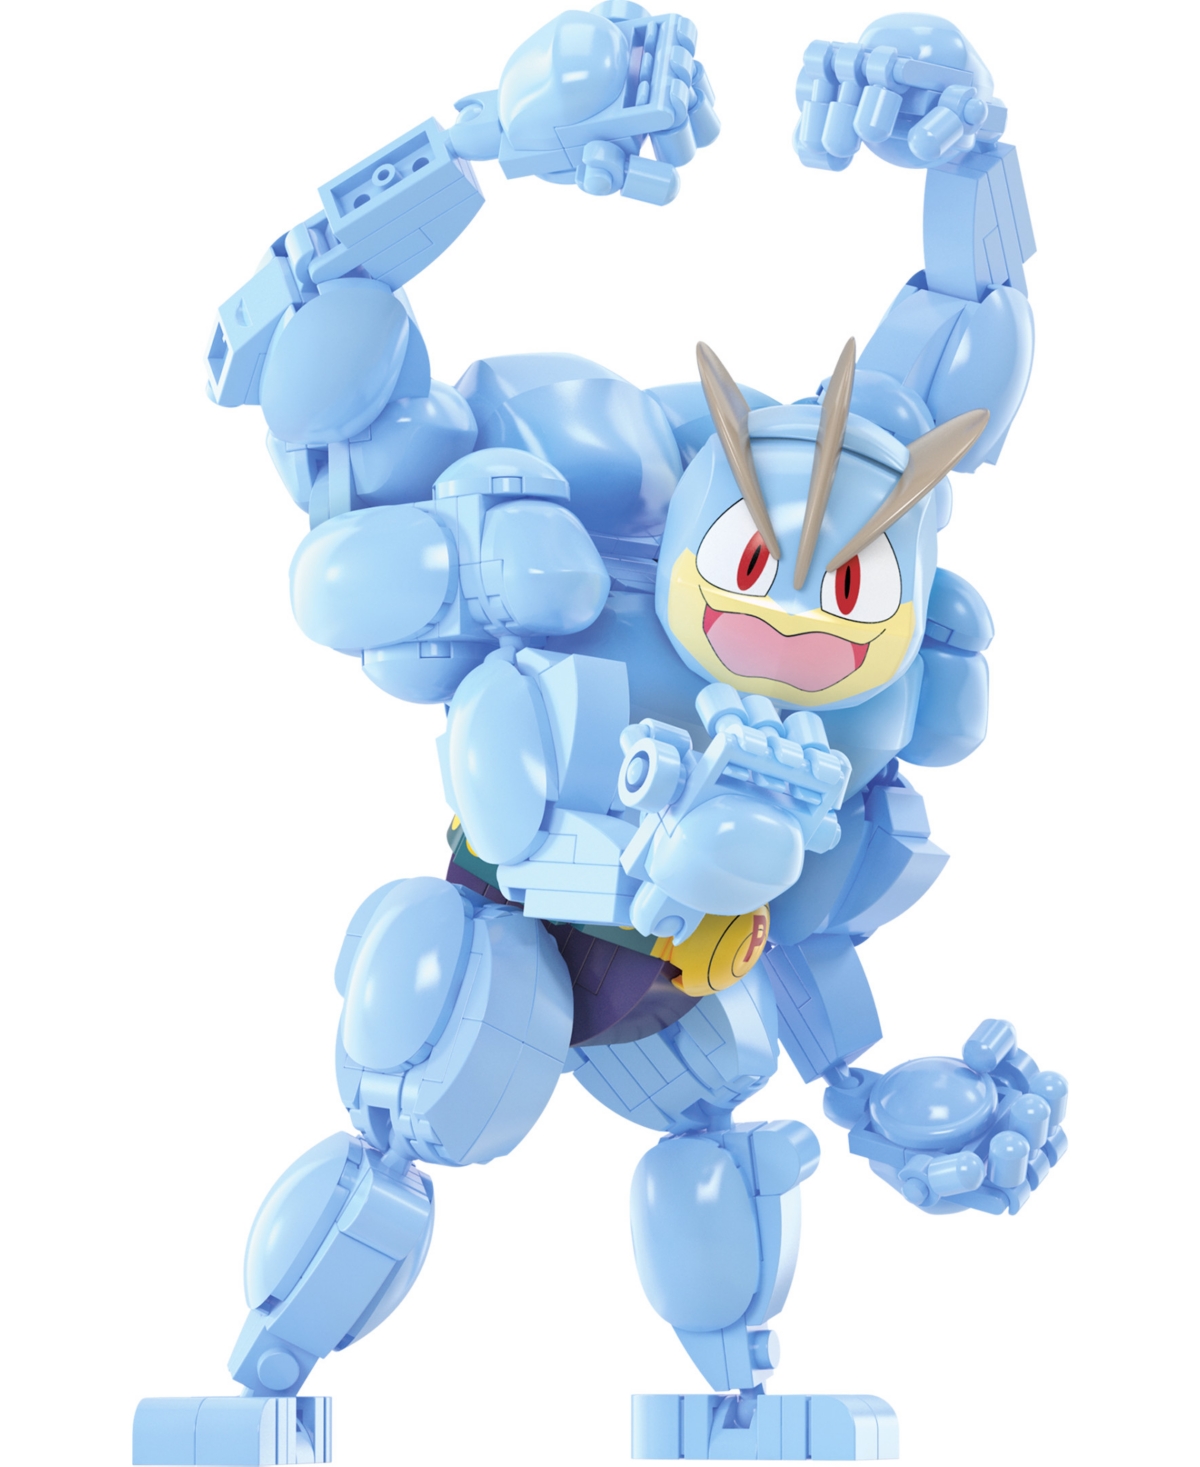 Shop Pokémon Machamp Building Toy Kit 399 Pieces With 1 Poseable Figure For Kids In Multicolor